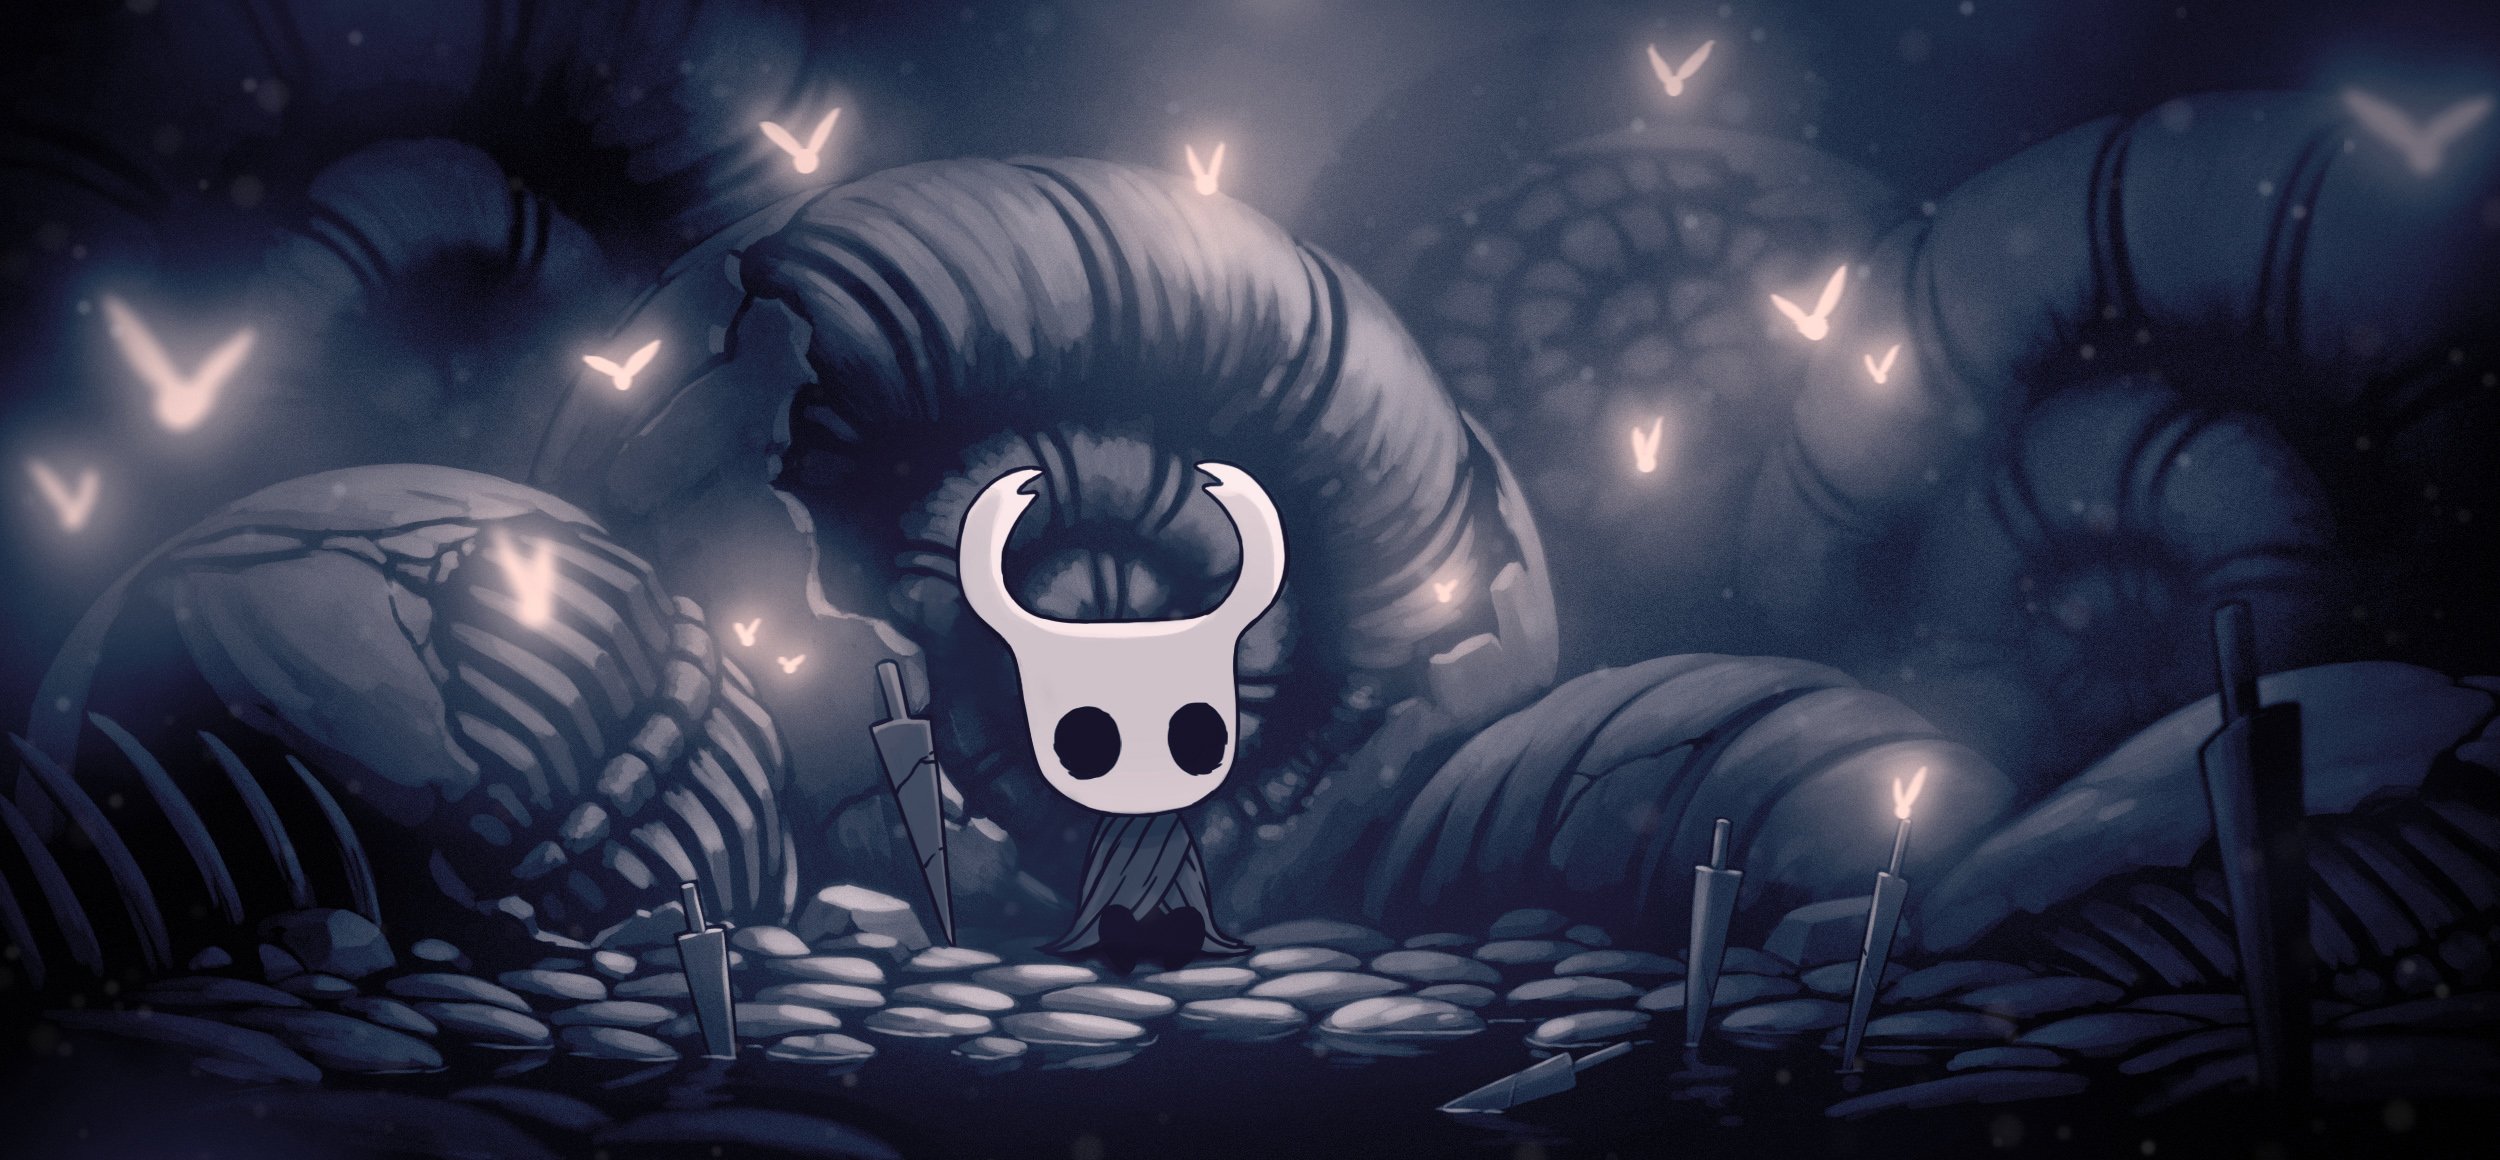 GIT GUD! (Late game spoilers) : HollowKnight